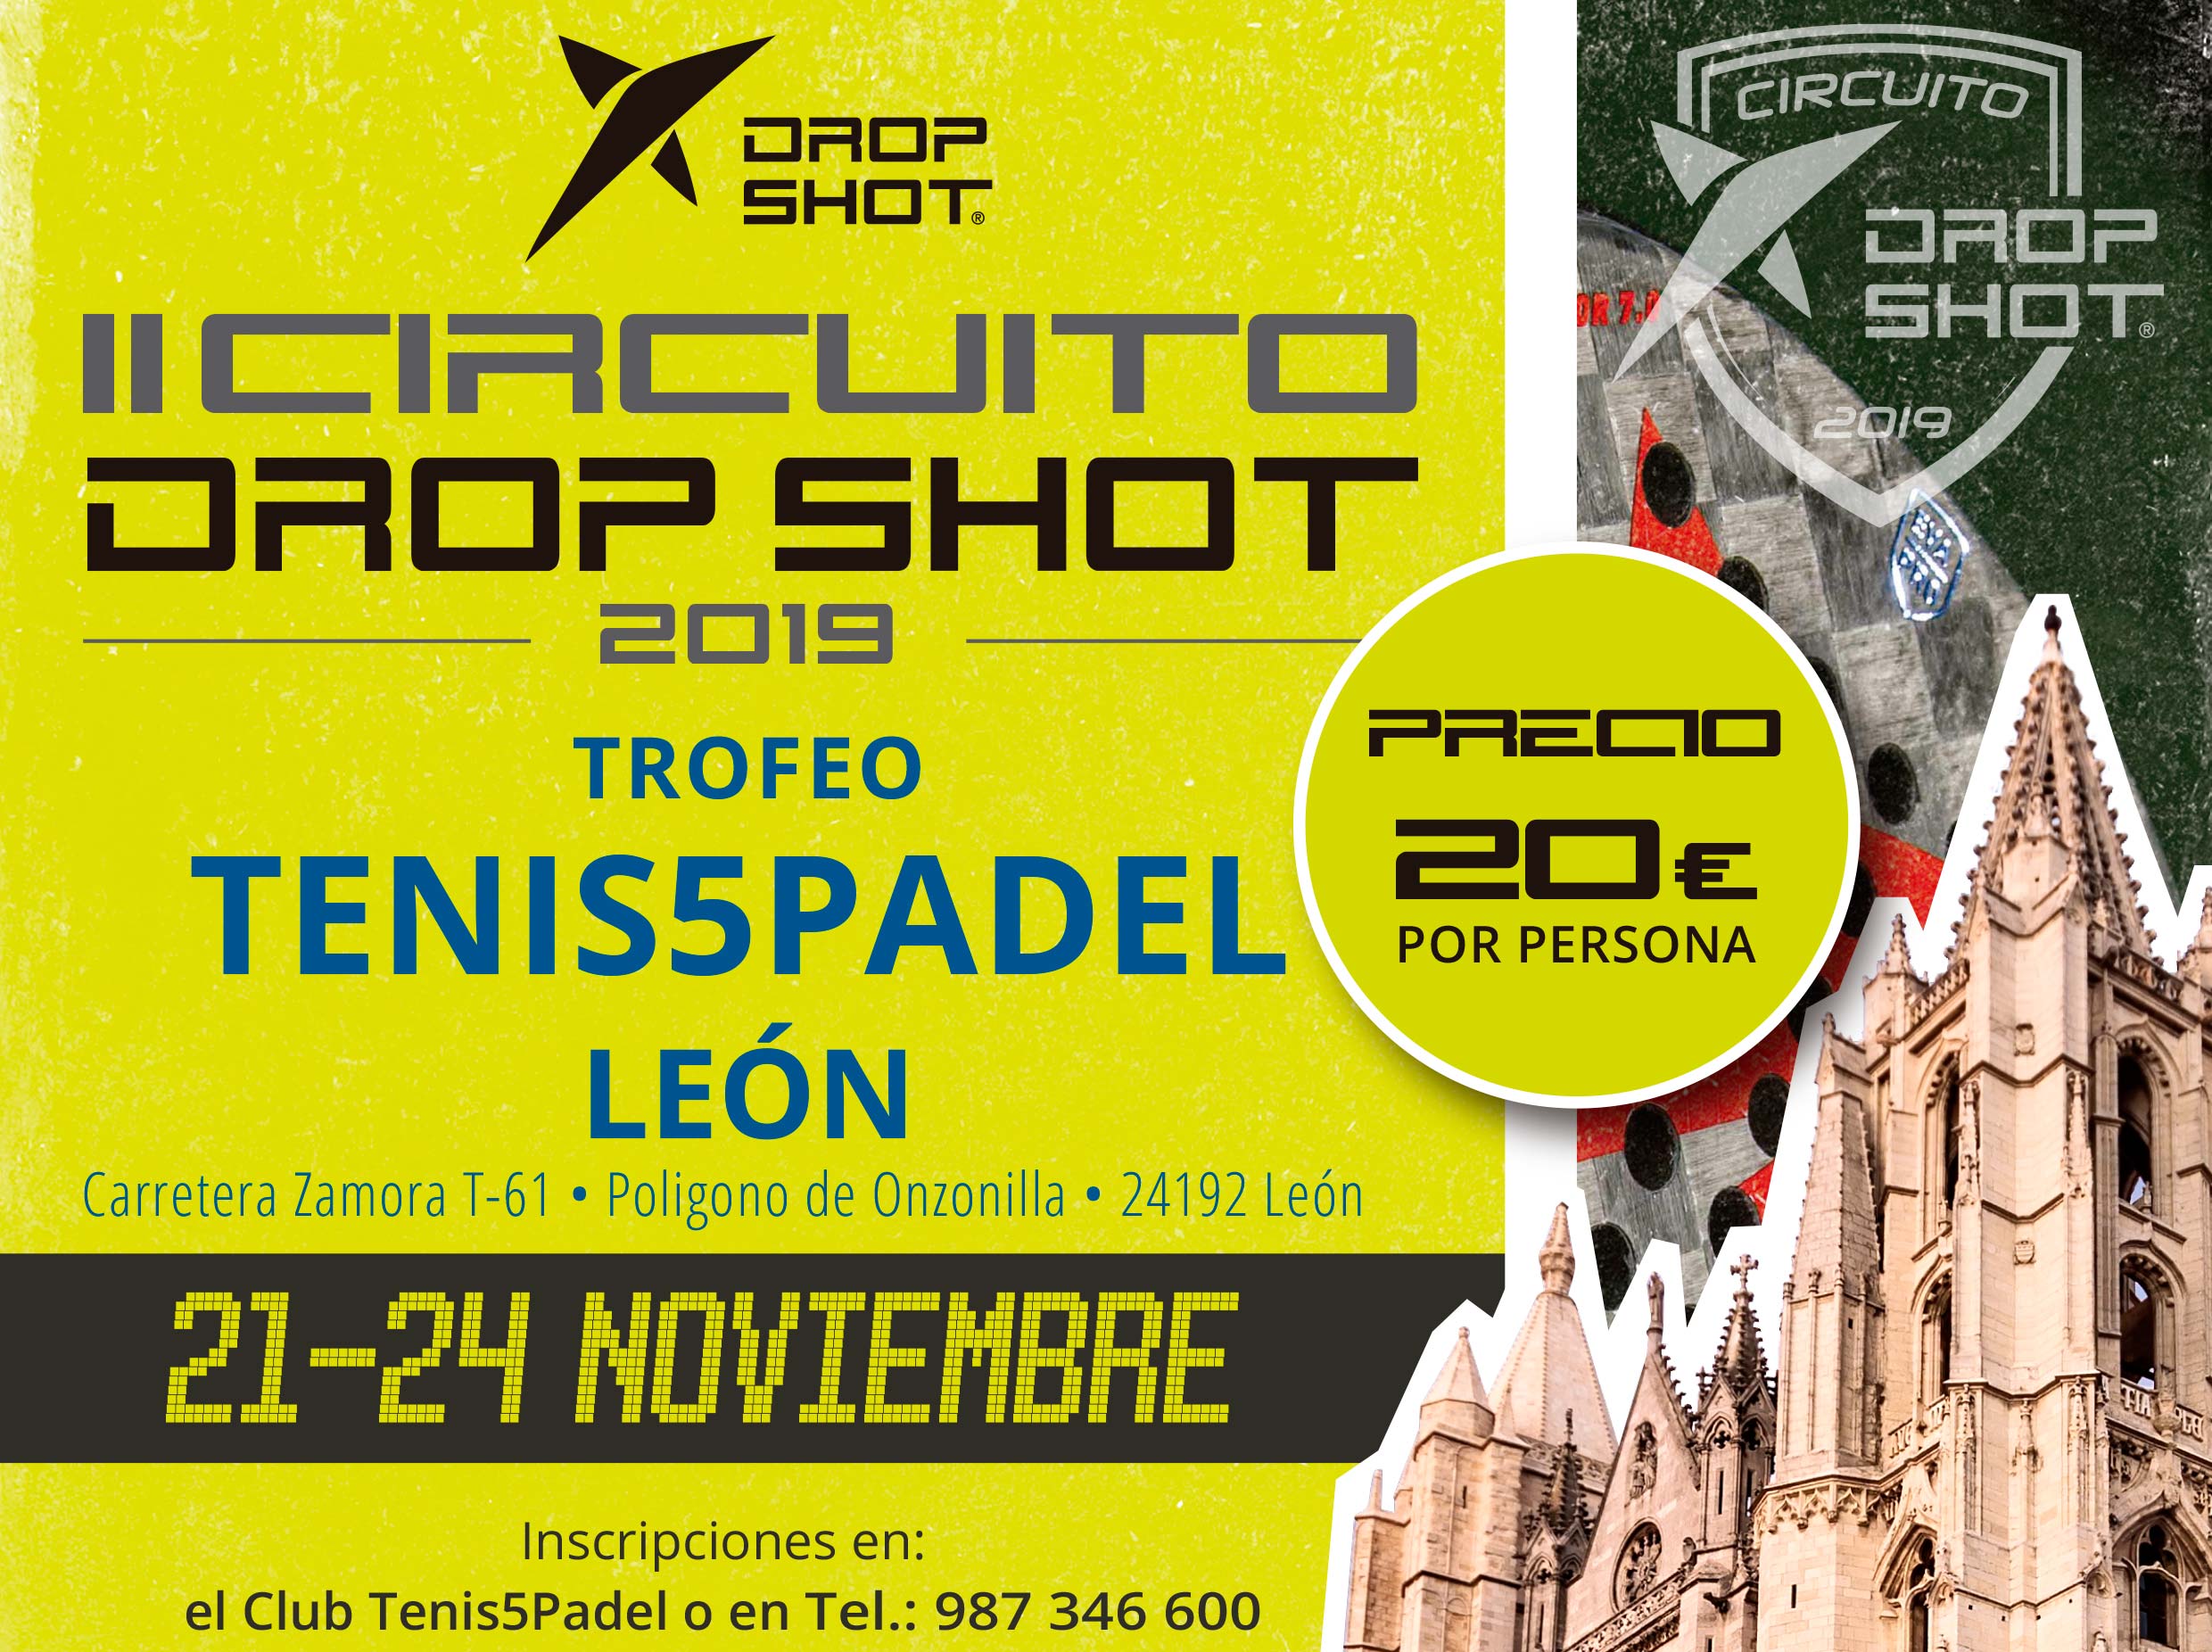 The poster of the II Circuit Shot Shot in its test in León.